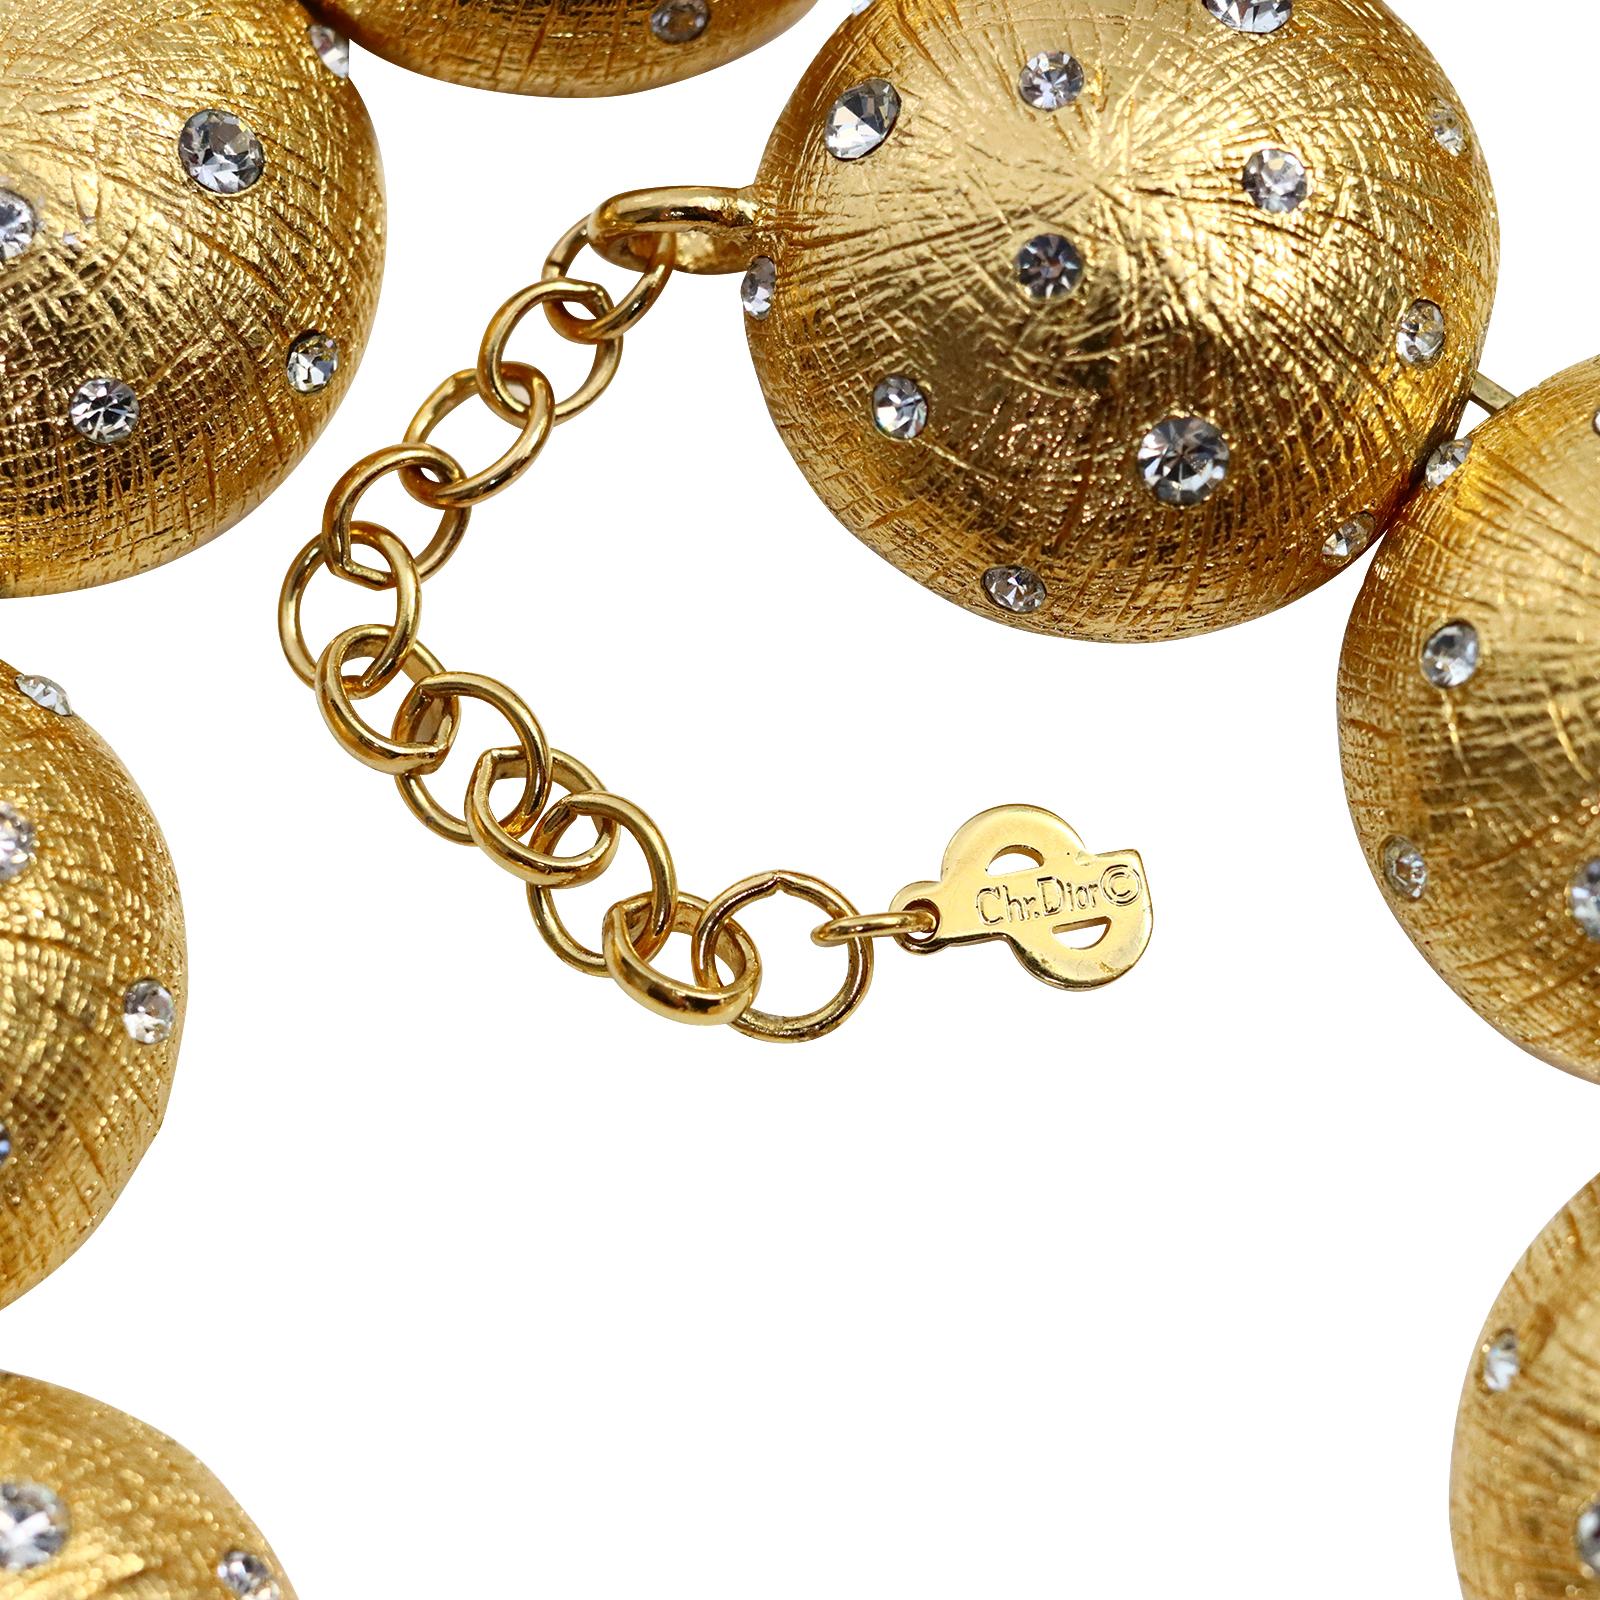 Vintage Christian Dior Gold Disc Necklace with Crystals Circa 1980s For Sale 3